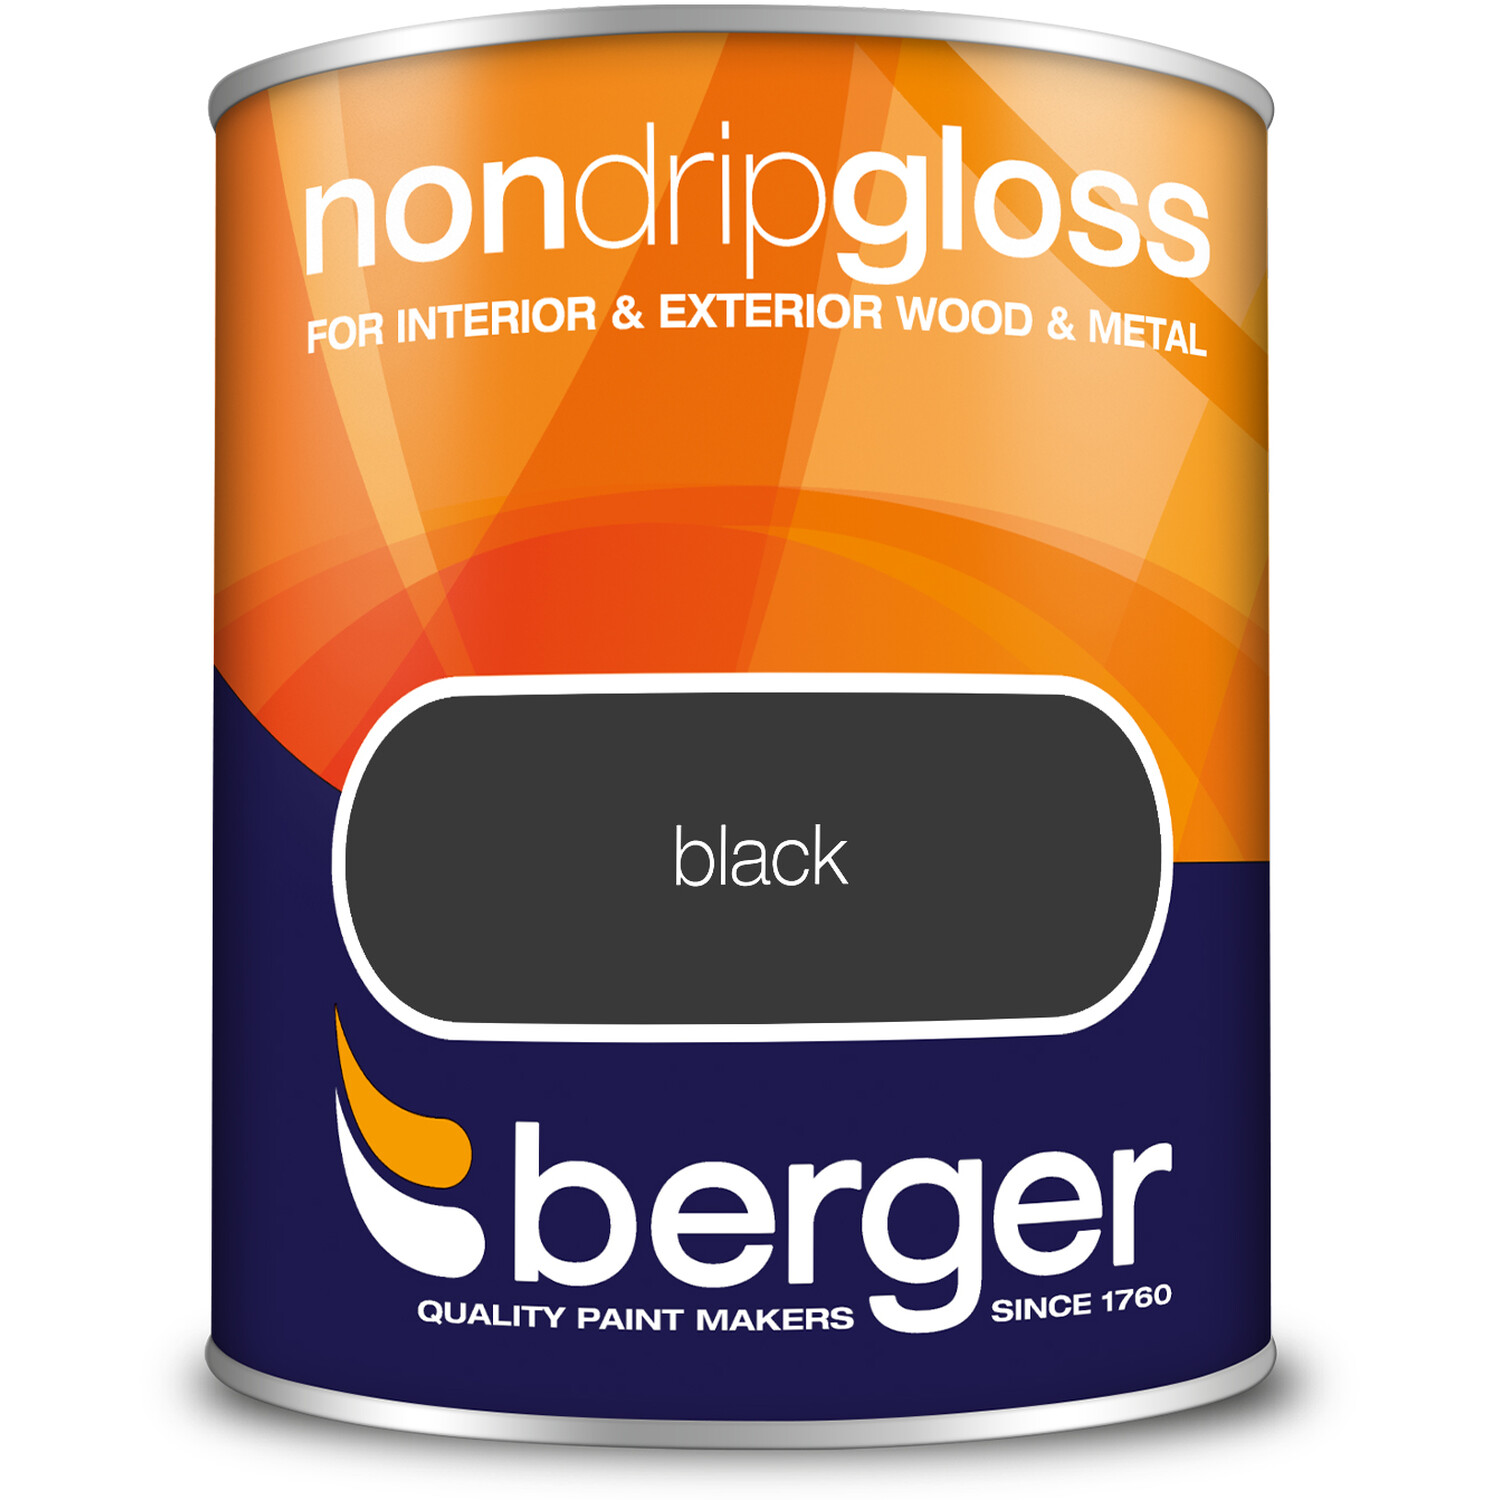 Berger Wood and Metal Black Non Drip Gloss Paint 750ml Image 2